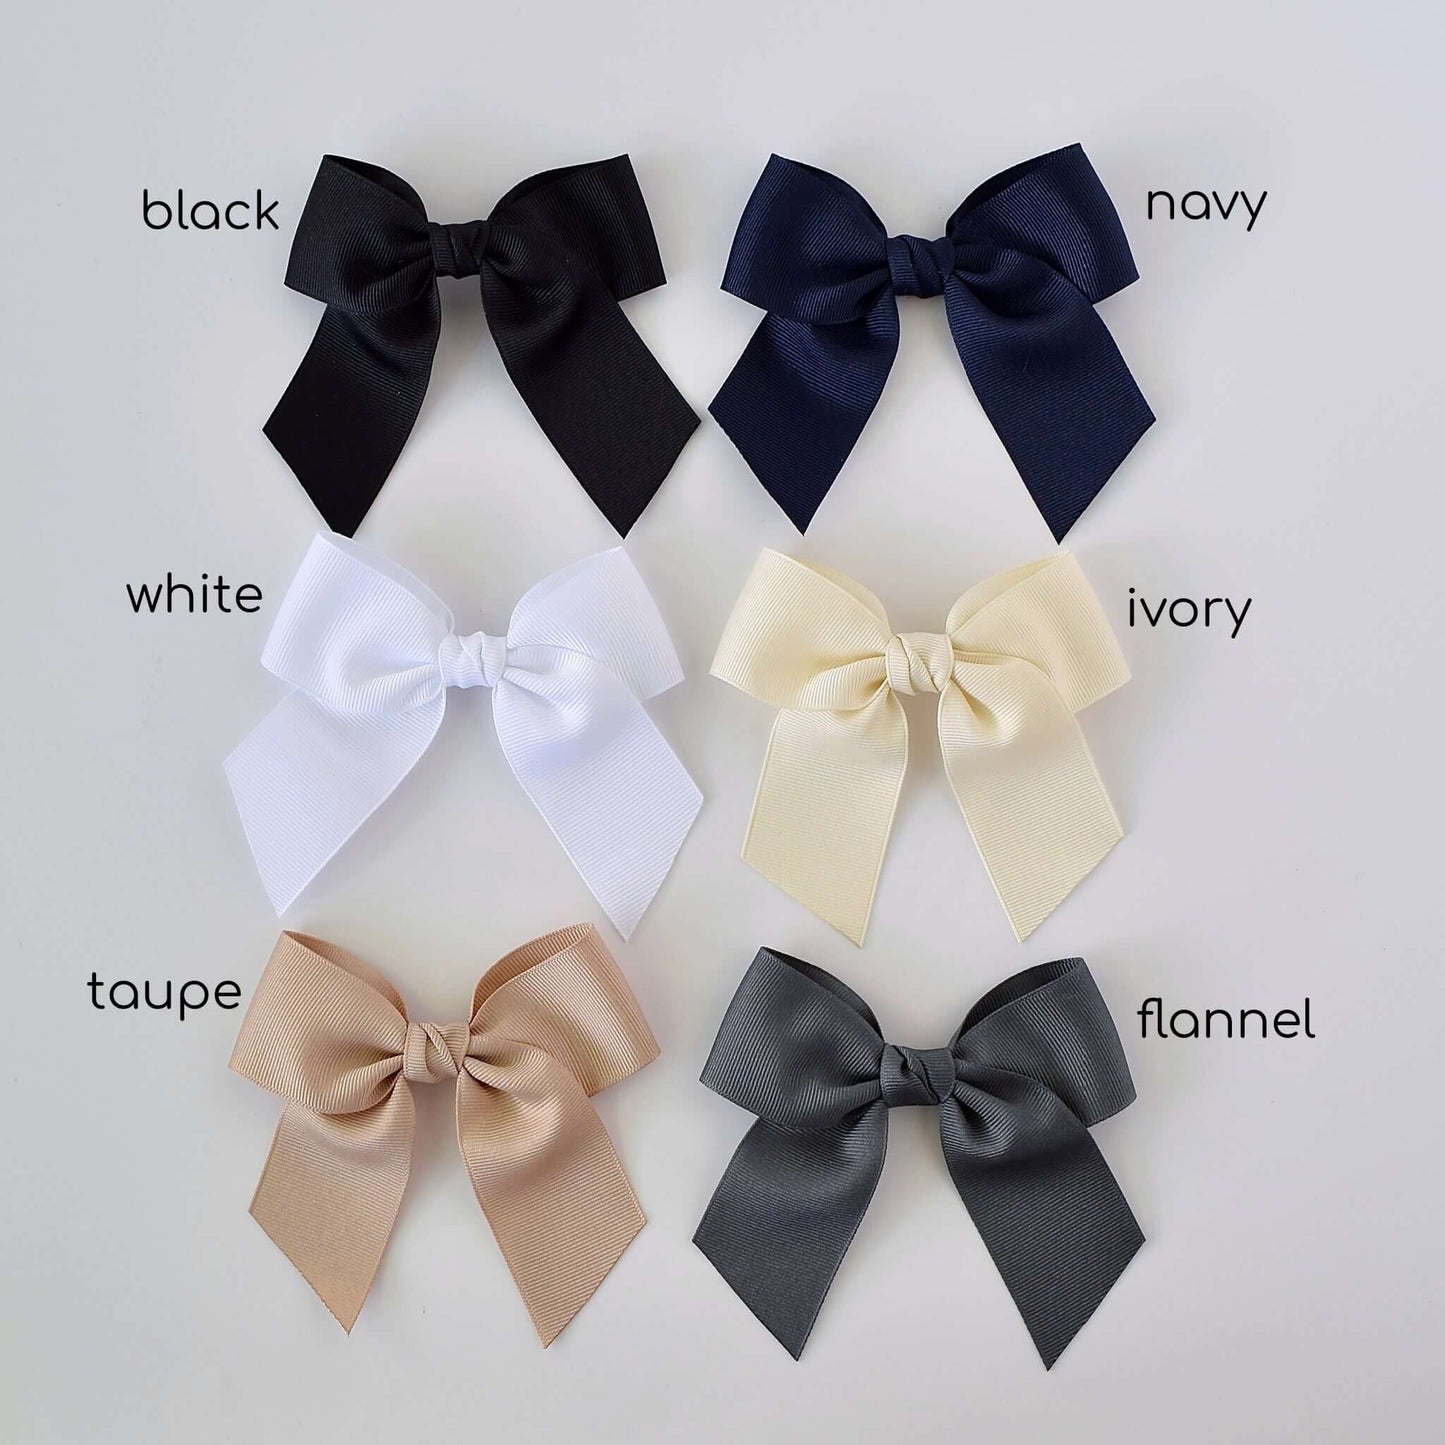 Six neutral 4-inch grosgrain sailor bows in black, navy, white, ivory, taupe, and flannel gray, displayed on a white background.